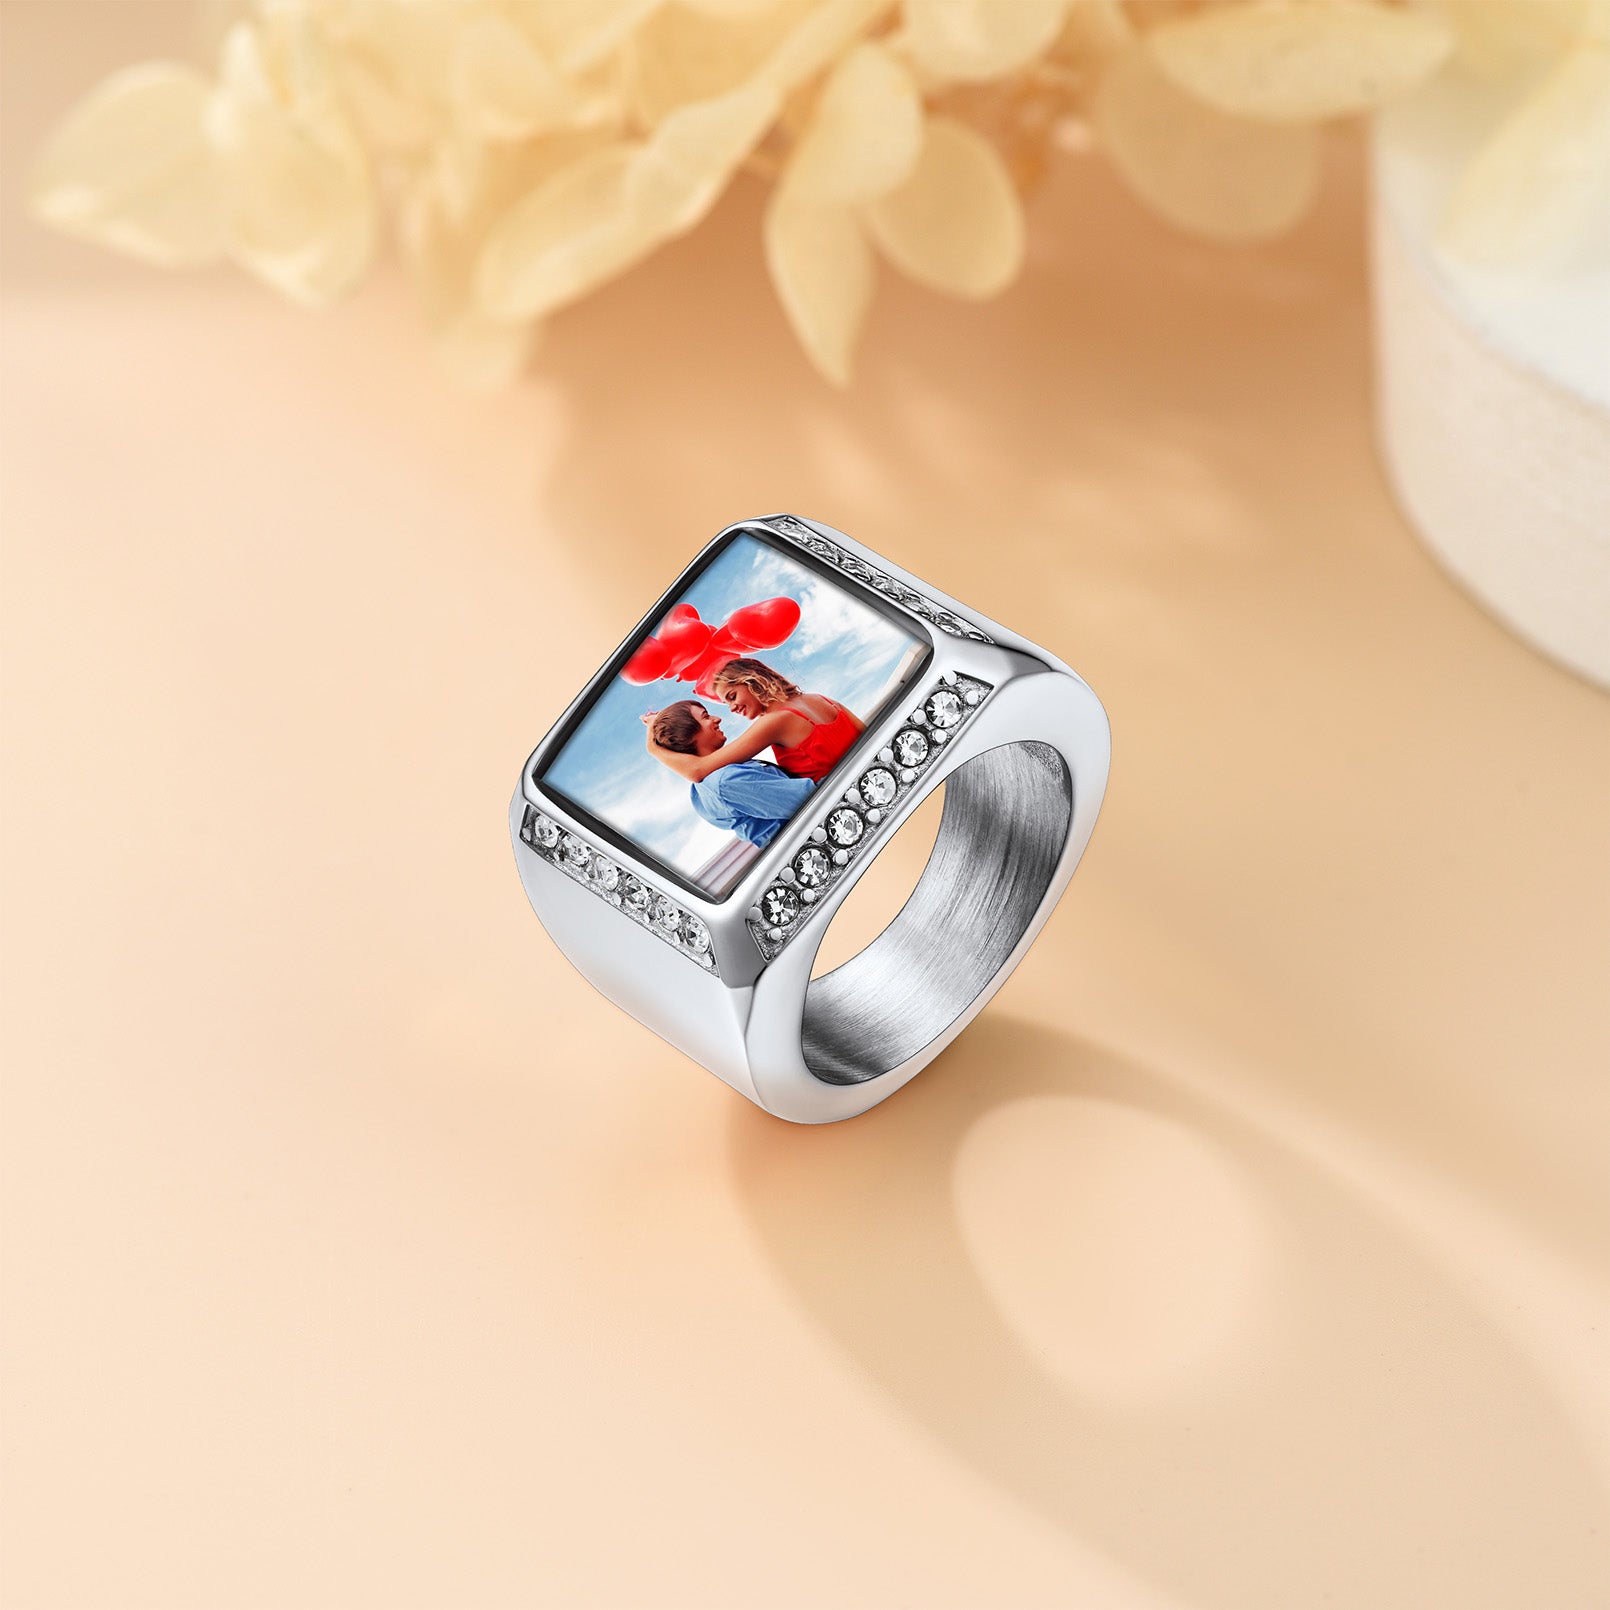 FaithHeart Personalized Pictures Name Engraving Stainless Steel Square Signet Ring FaithHeart